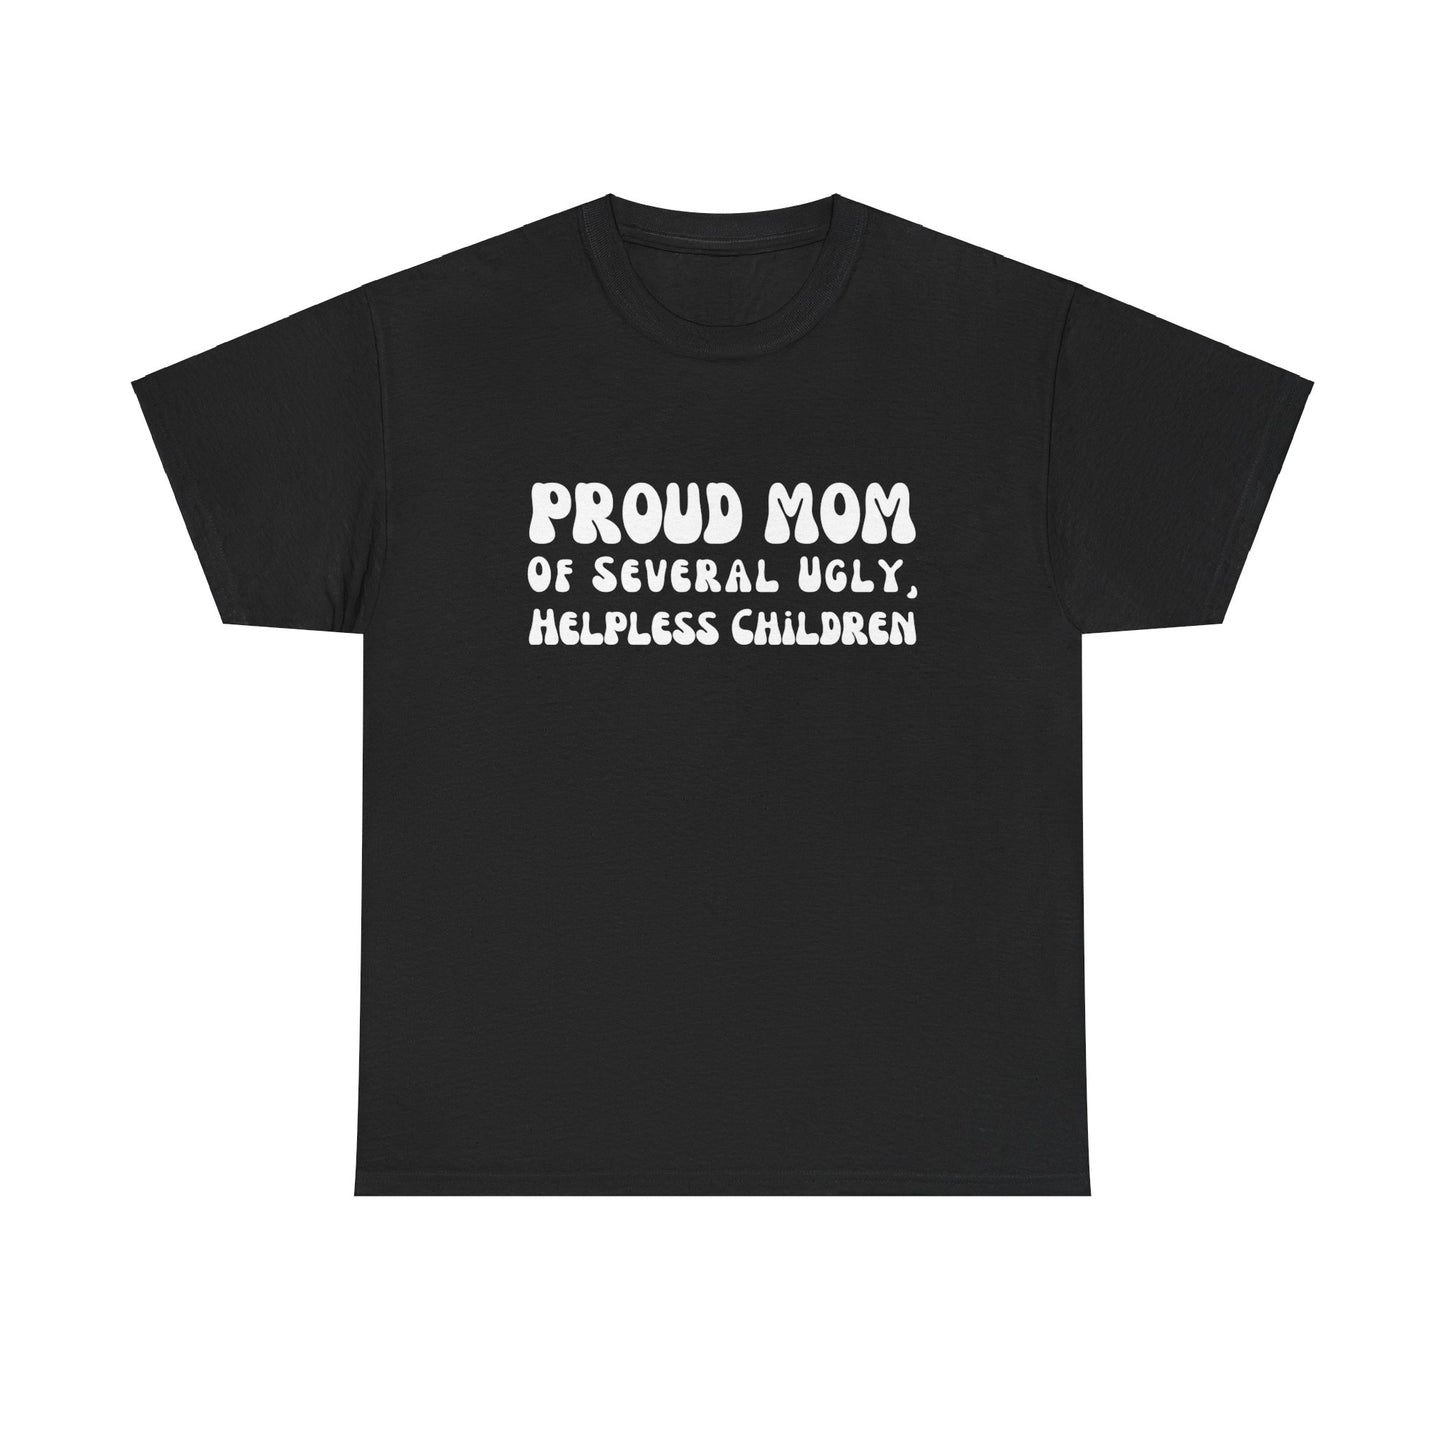 "Proud Mom Of Several Ugly, Helpless Children" Shirt